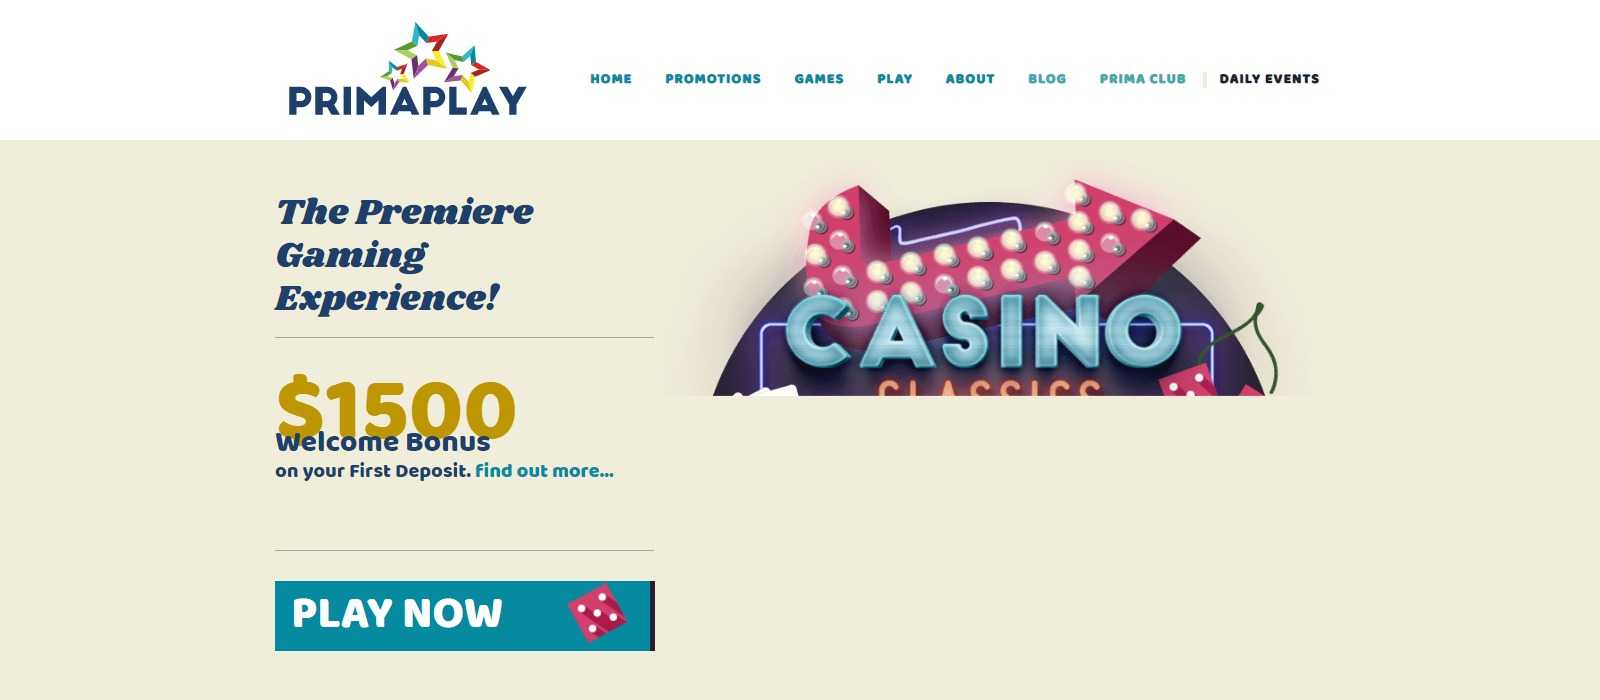 PrimaPlay Affiliate Program Review: Earn Up To 40% Recurring Revenue Share